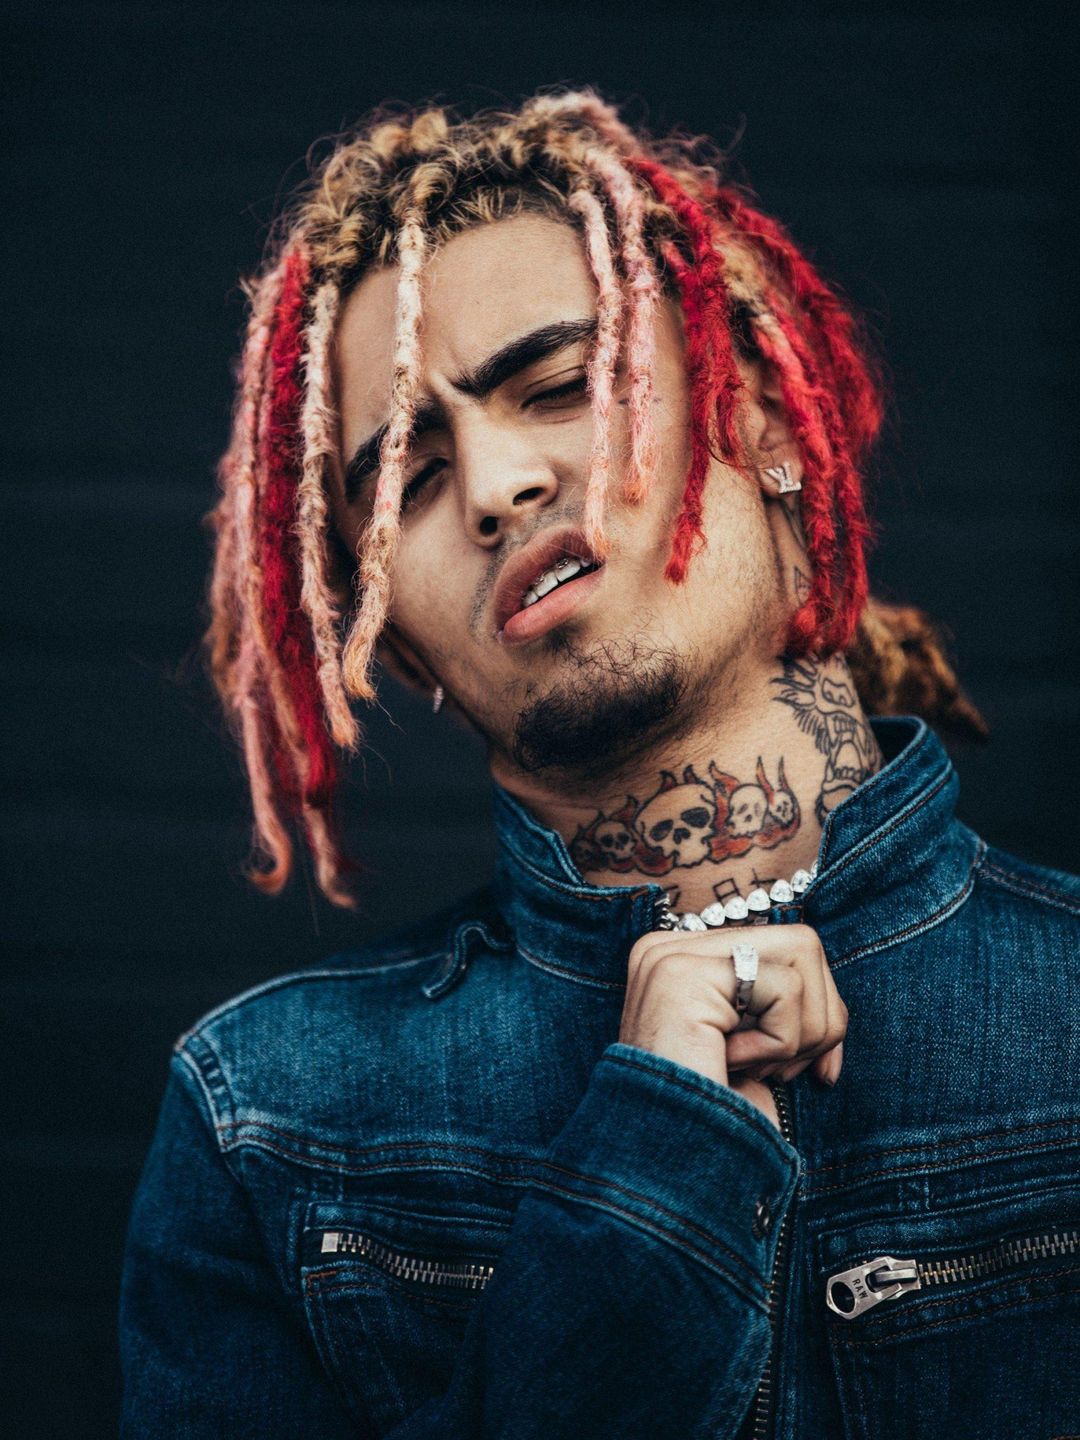 Lil Pump height and weight